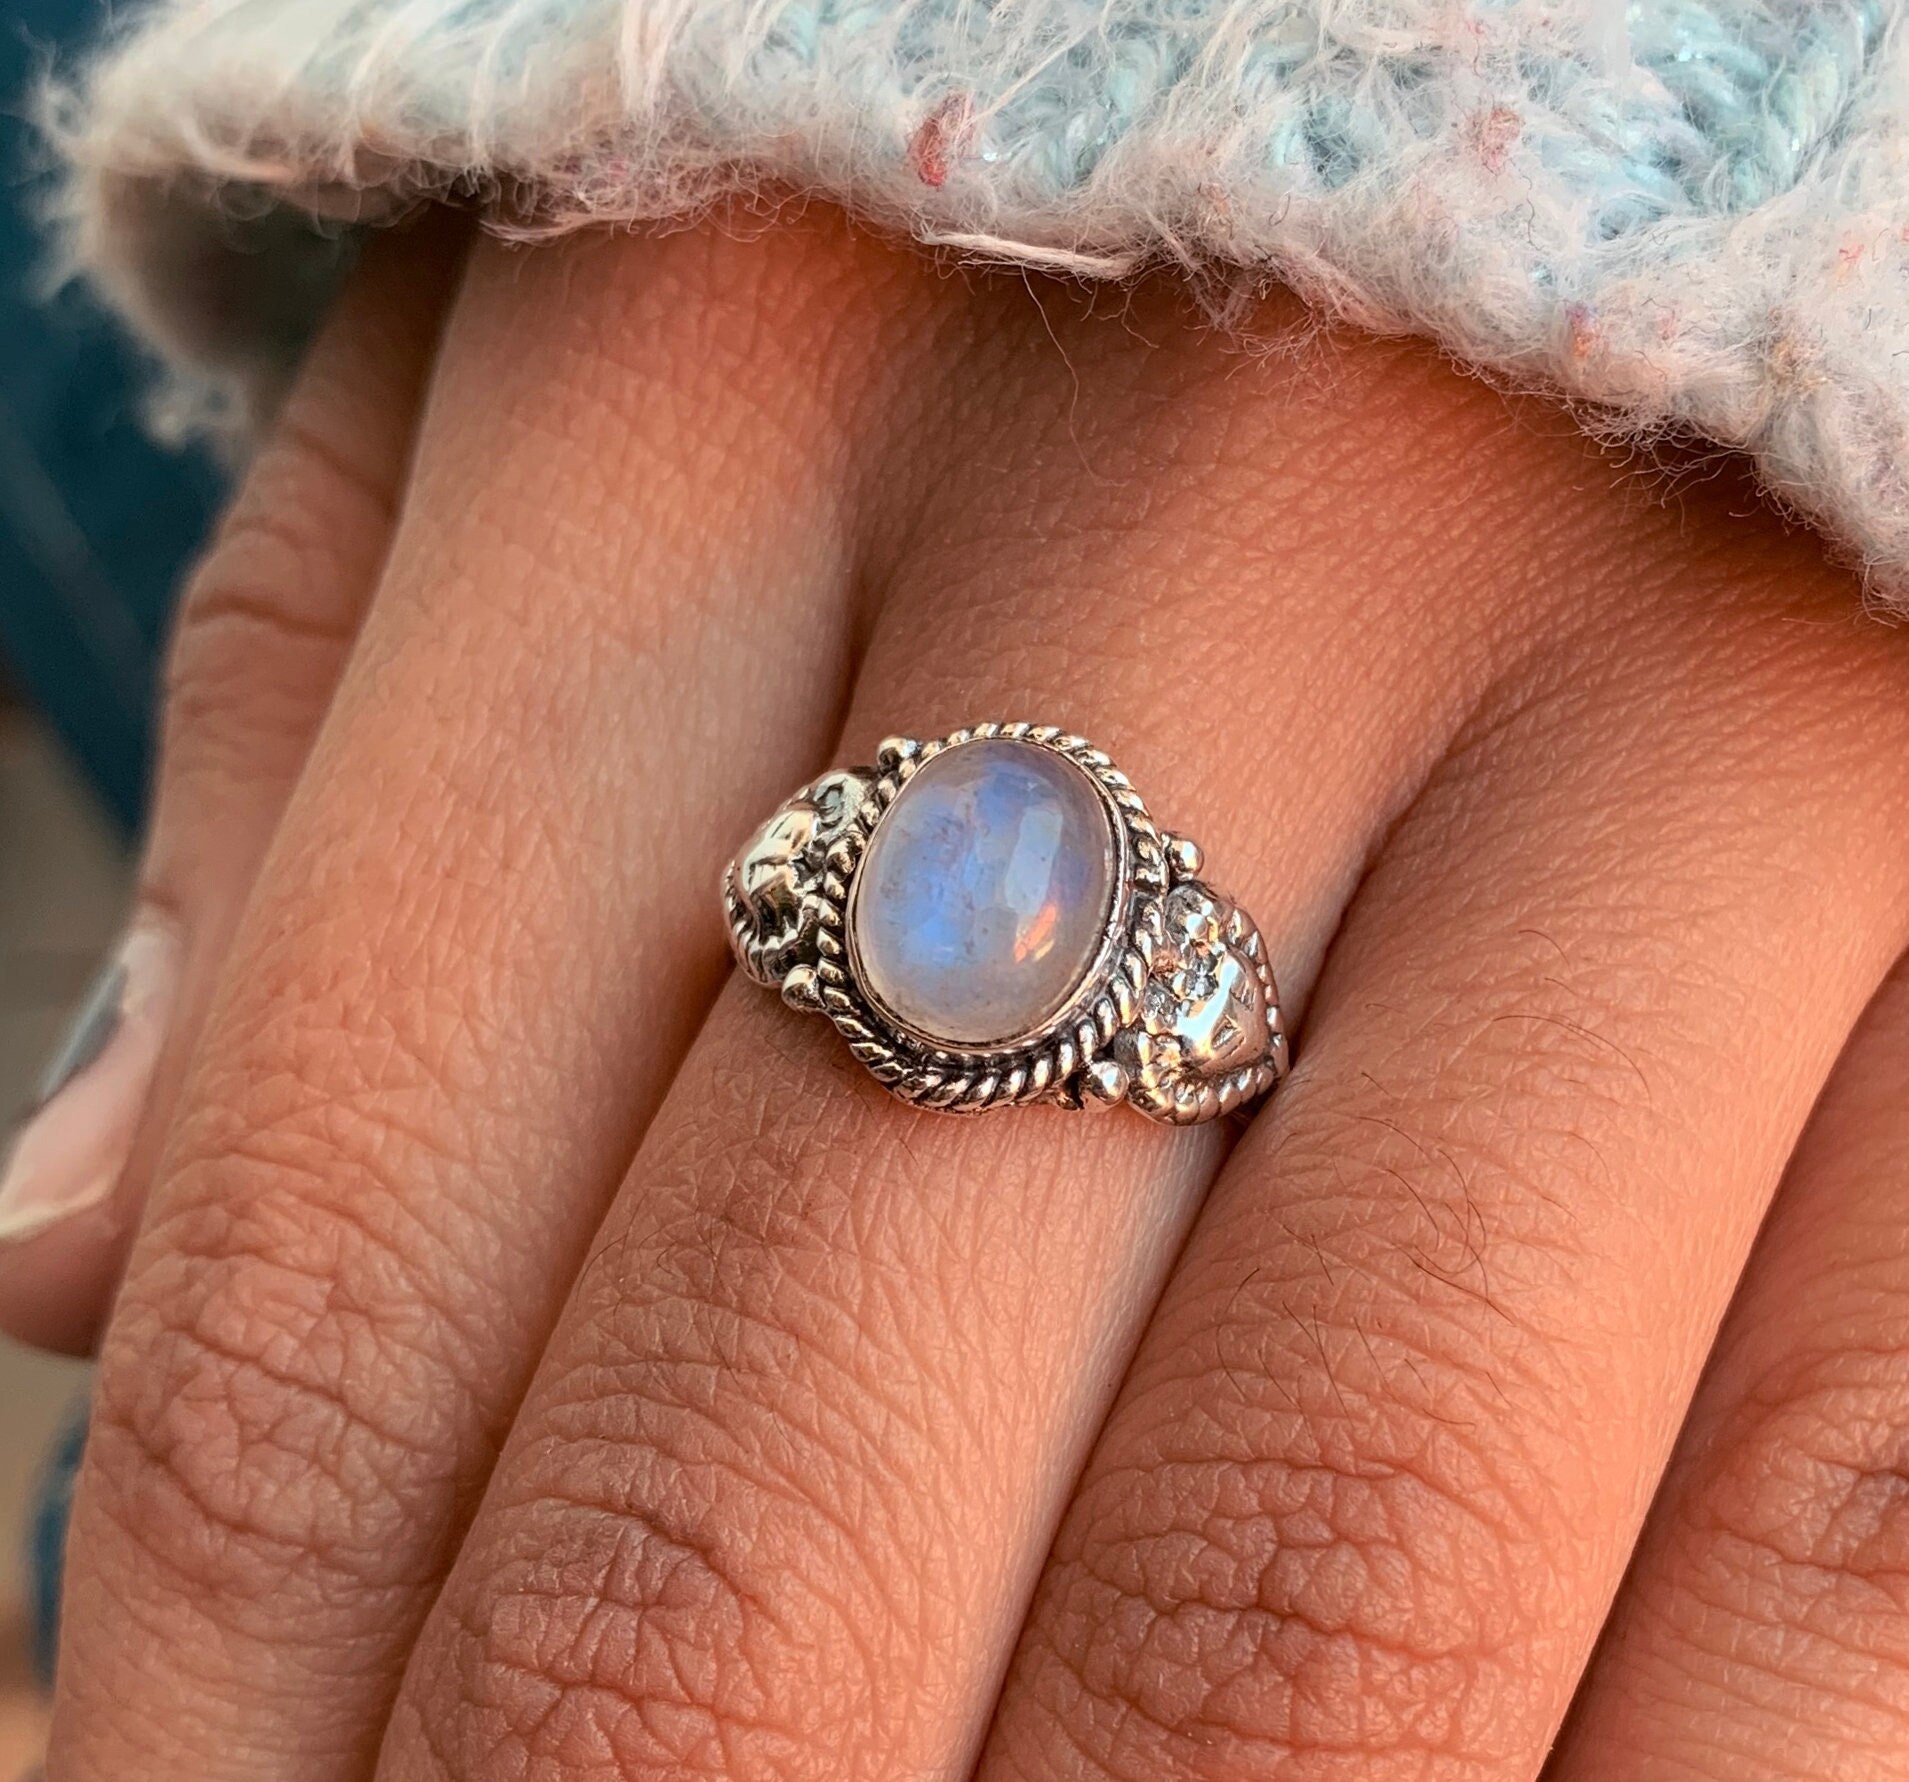 Rainbow Moonstone Ring, Leaf Ring, Vintage Ring, June Birthstone, Natural Moonstone  Ring, Flower Ring, Silver Branch Ring, Solid Silver Ring - Etsy